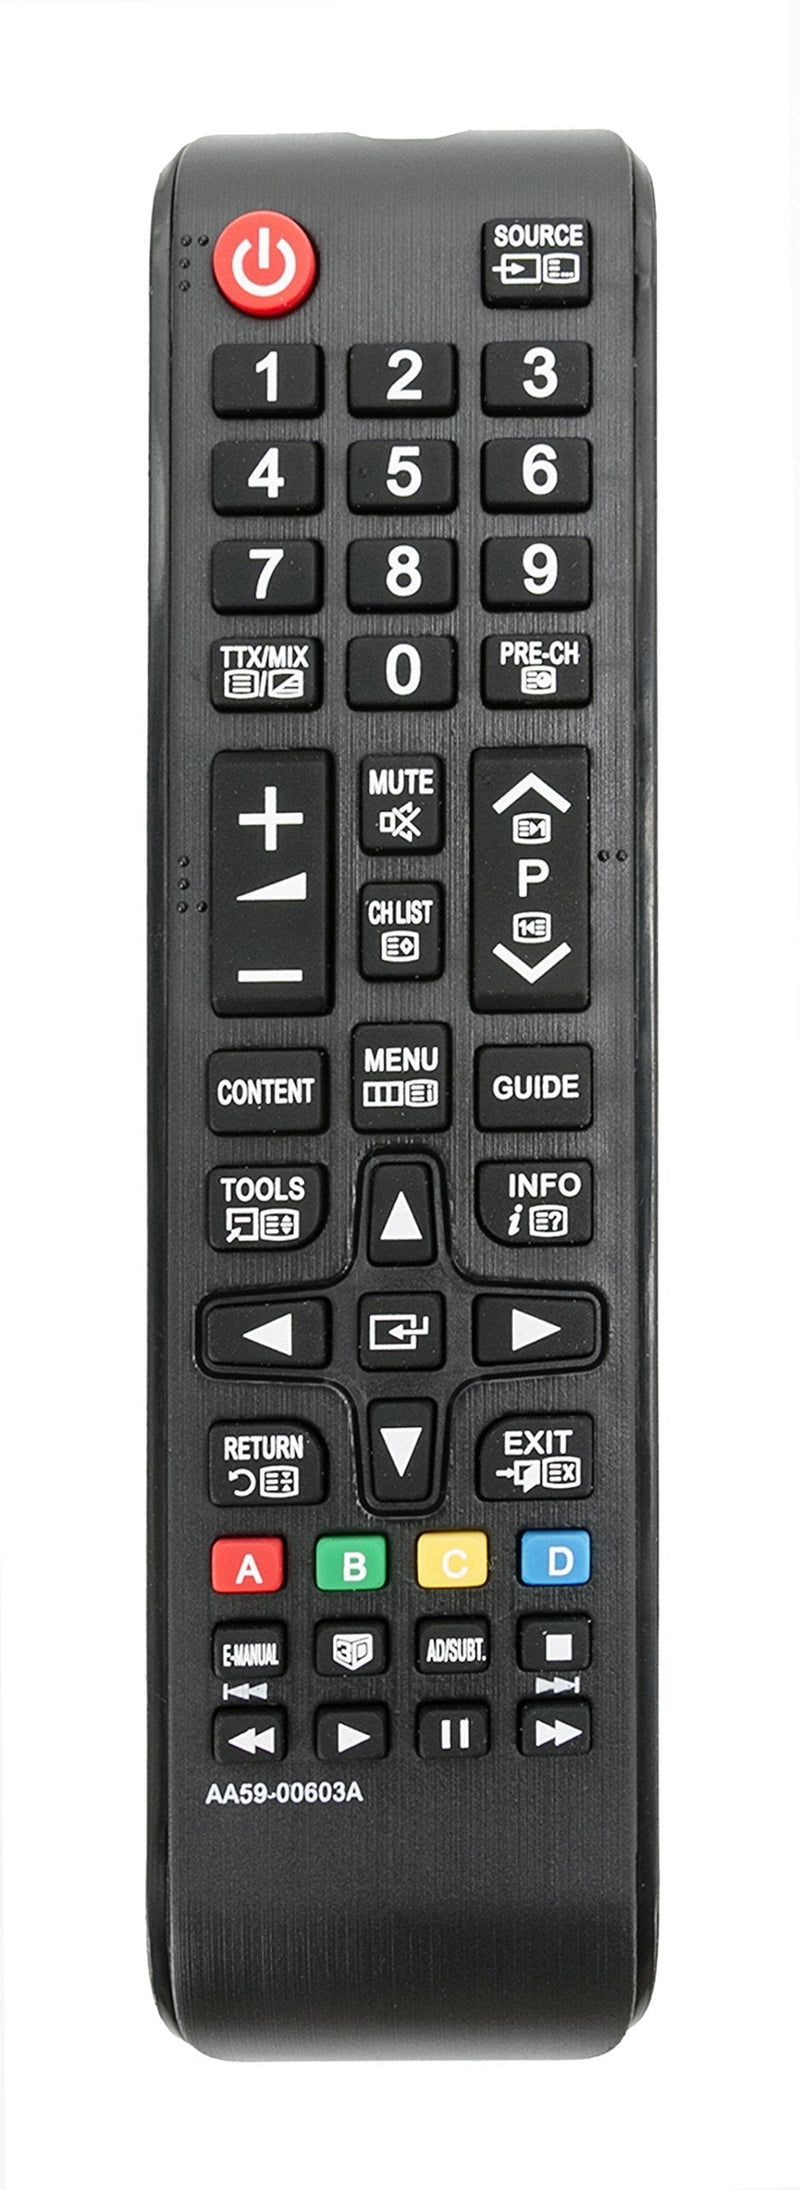 AA59-00603A AA5900603A Replaced Remote Control fit for Samsung TV Remote AA59-00558A AA59-00580A AA59-00588A PS51F4900AW PS51F4900AK PS43F4900AK PS43F4900AW